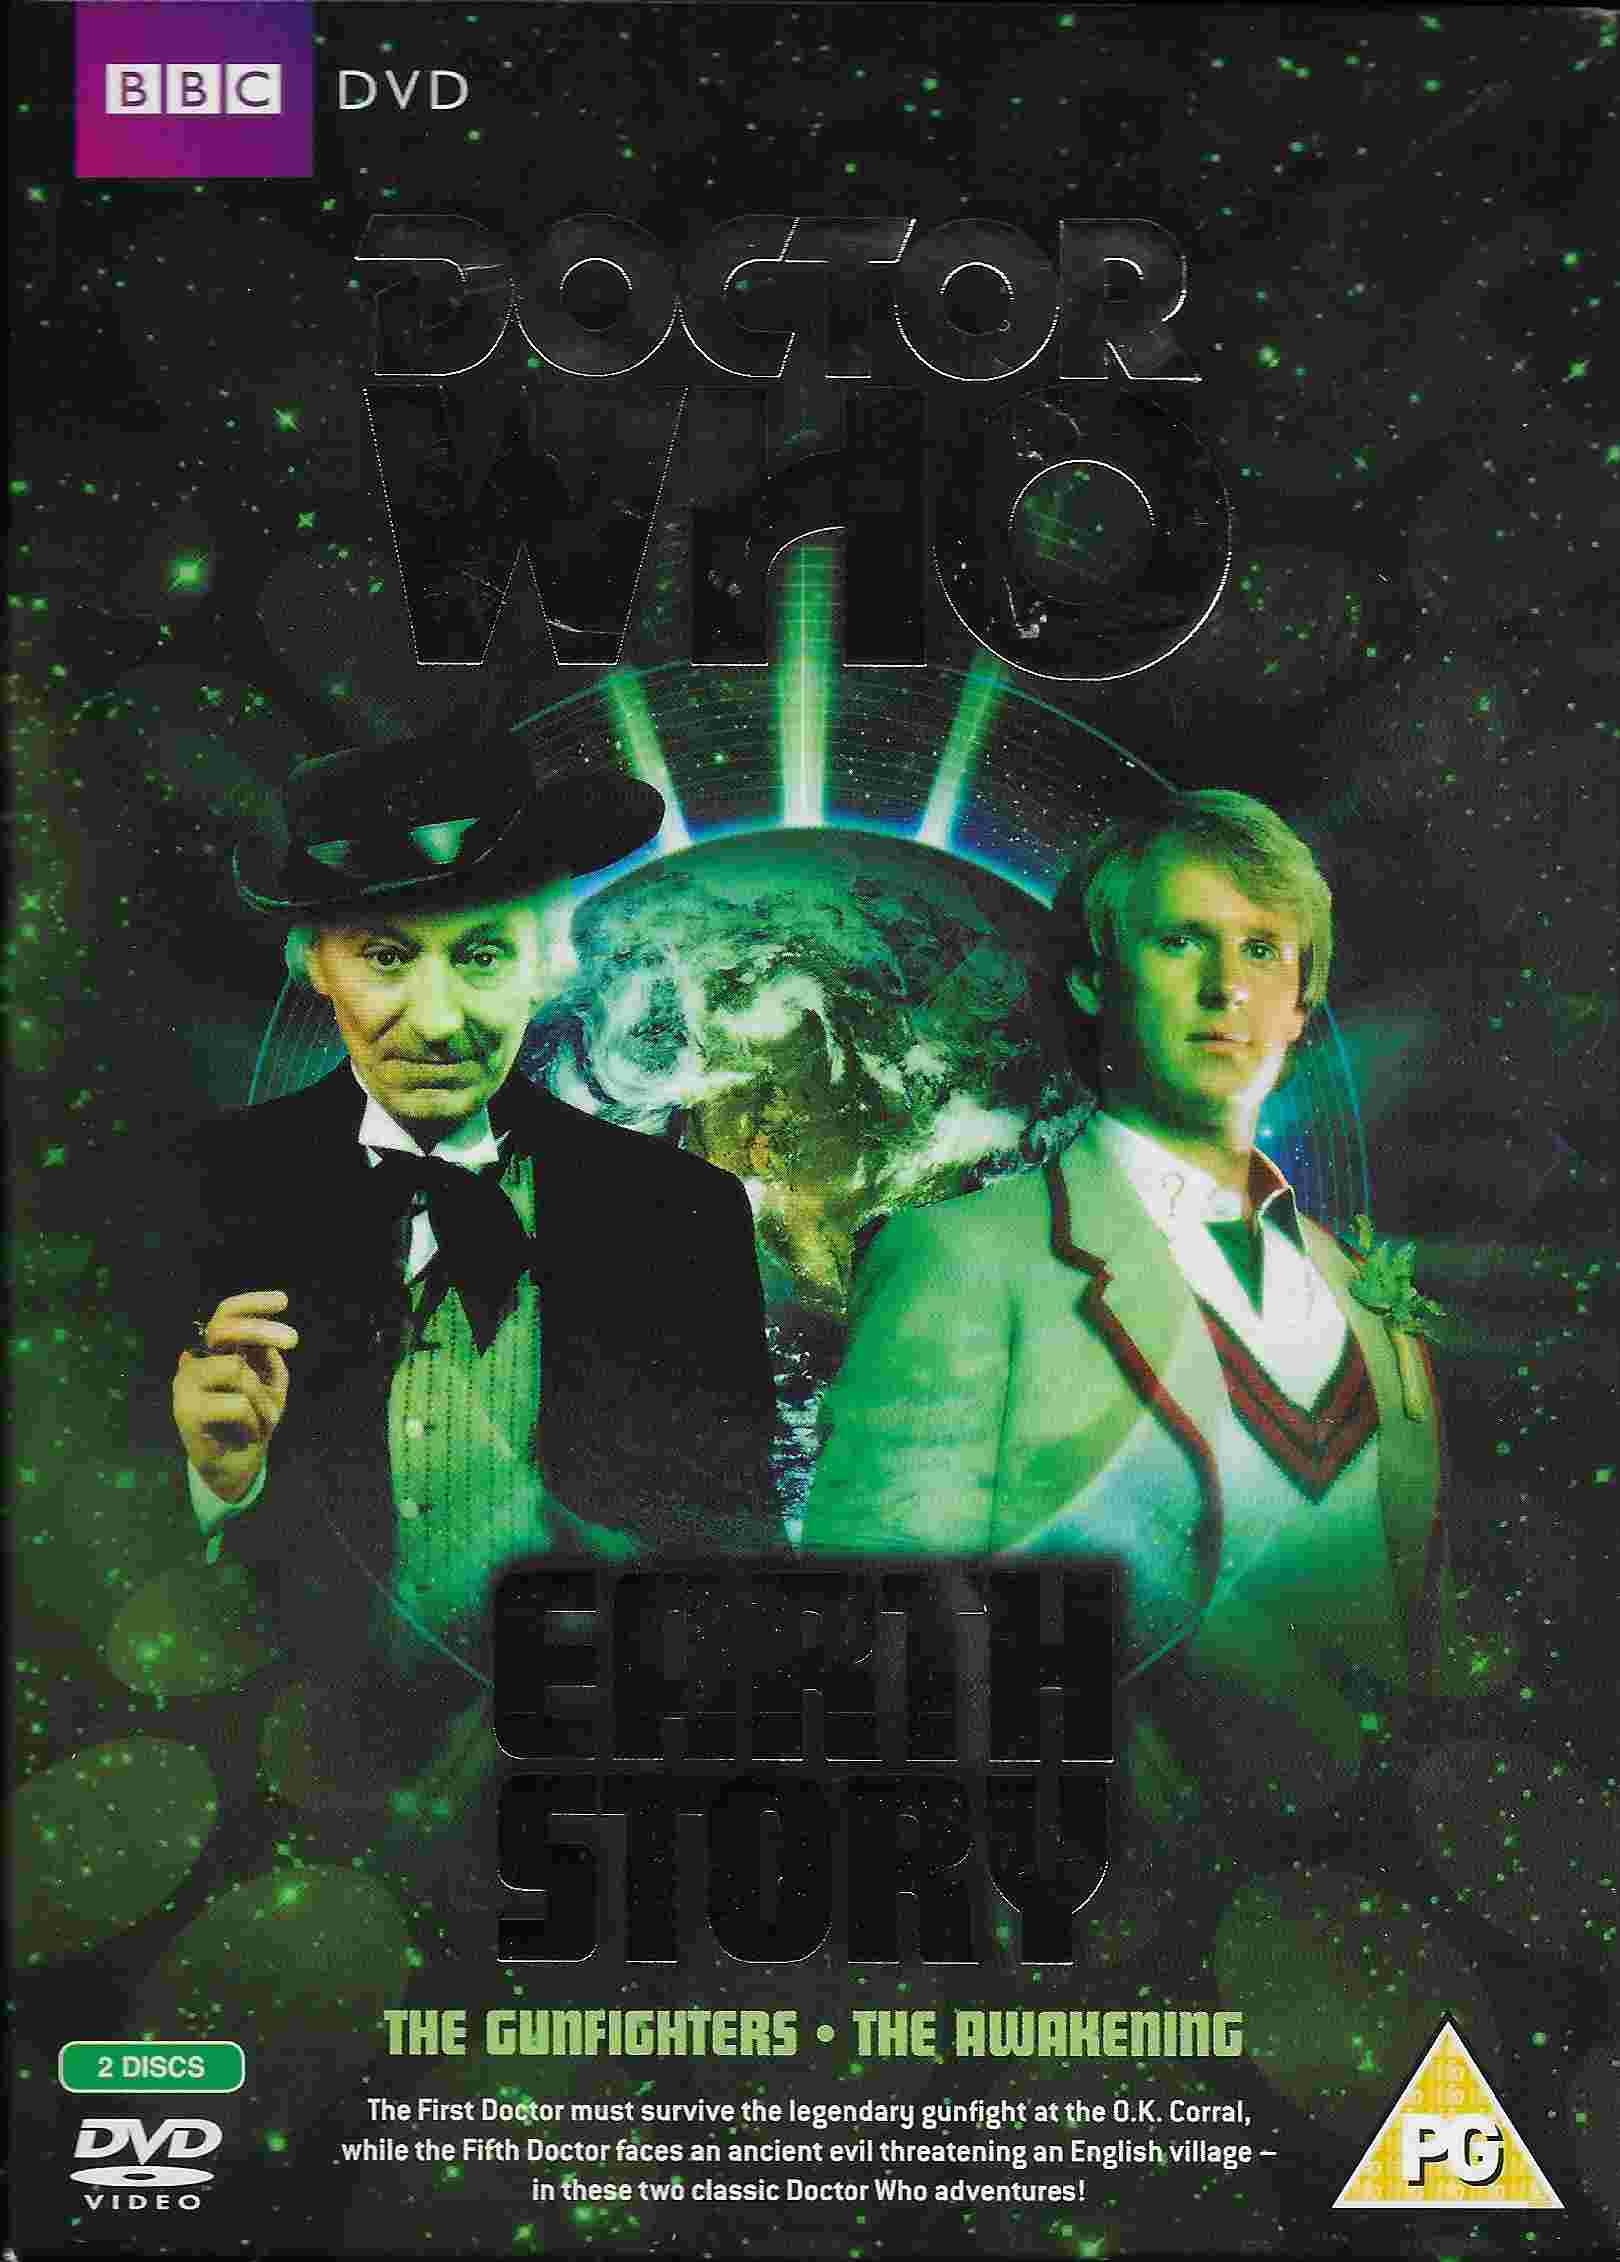 Picture of BBCDVD 3380 Doctor Who - Earth story by artist Donald Cotton / Malcolm Hulke from the BBC dvds - Records and Tapes library